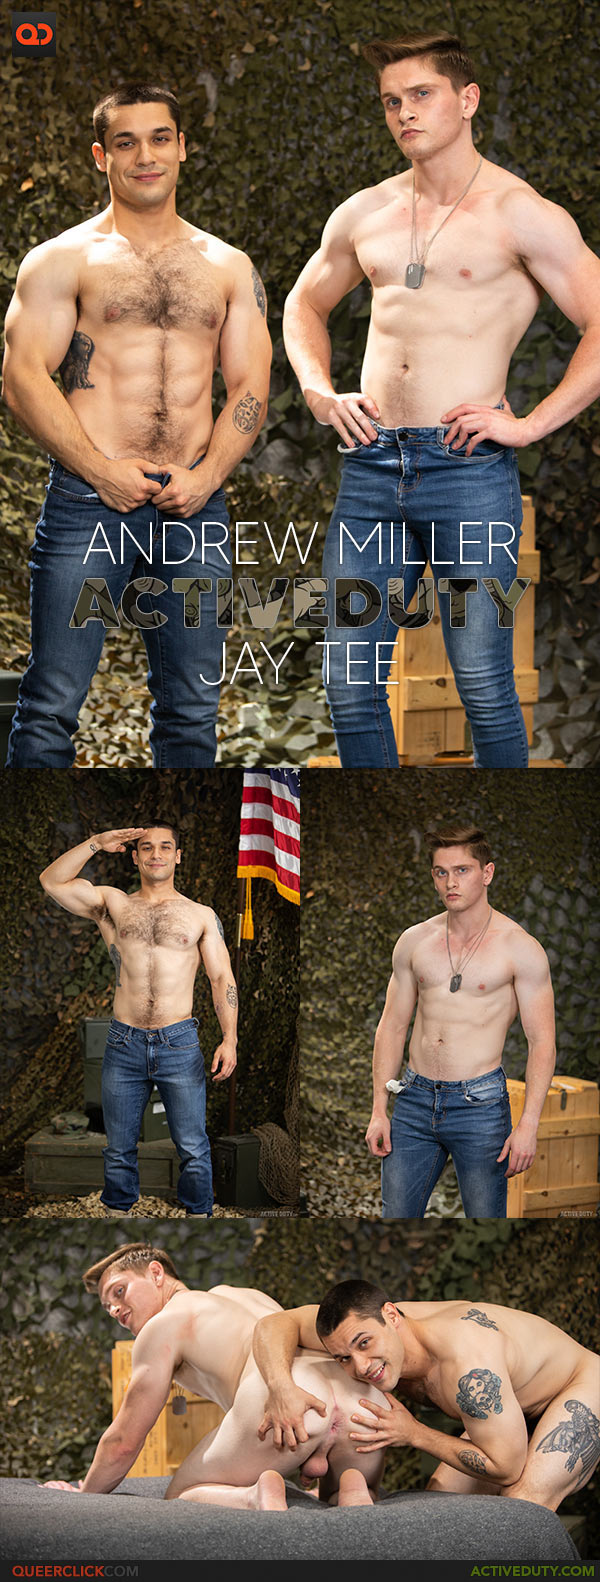 Active Duty: Andrew Miller and Jay Tee Flip Fuck - Jay Tee Engages Andrew